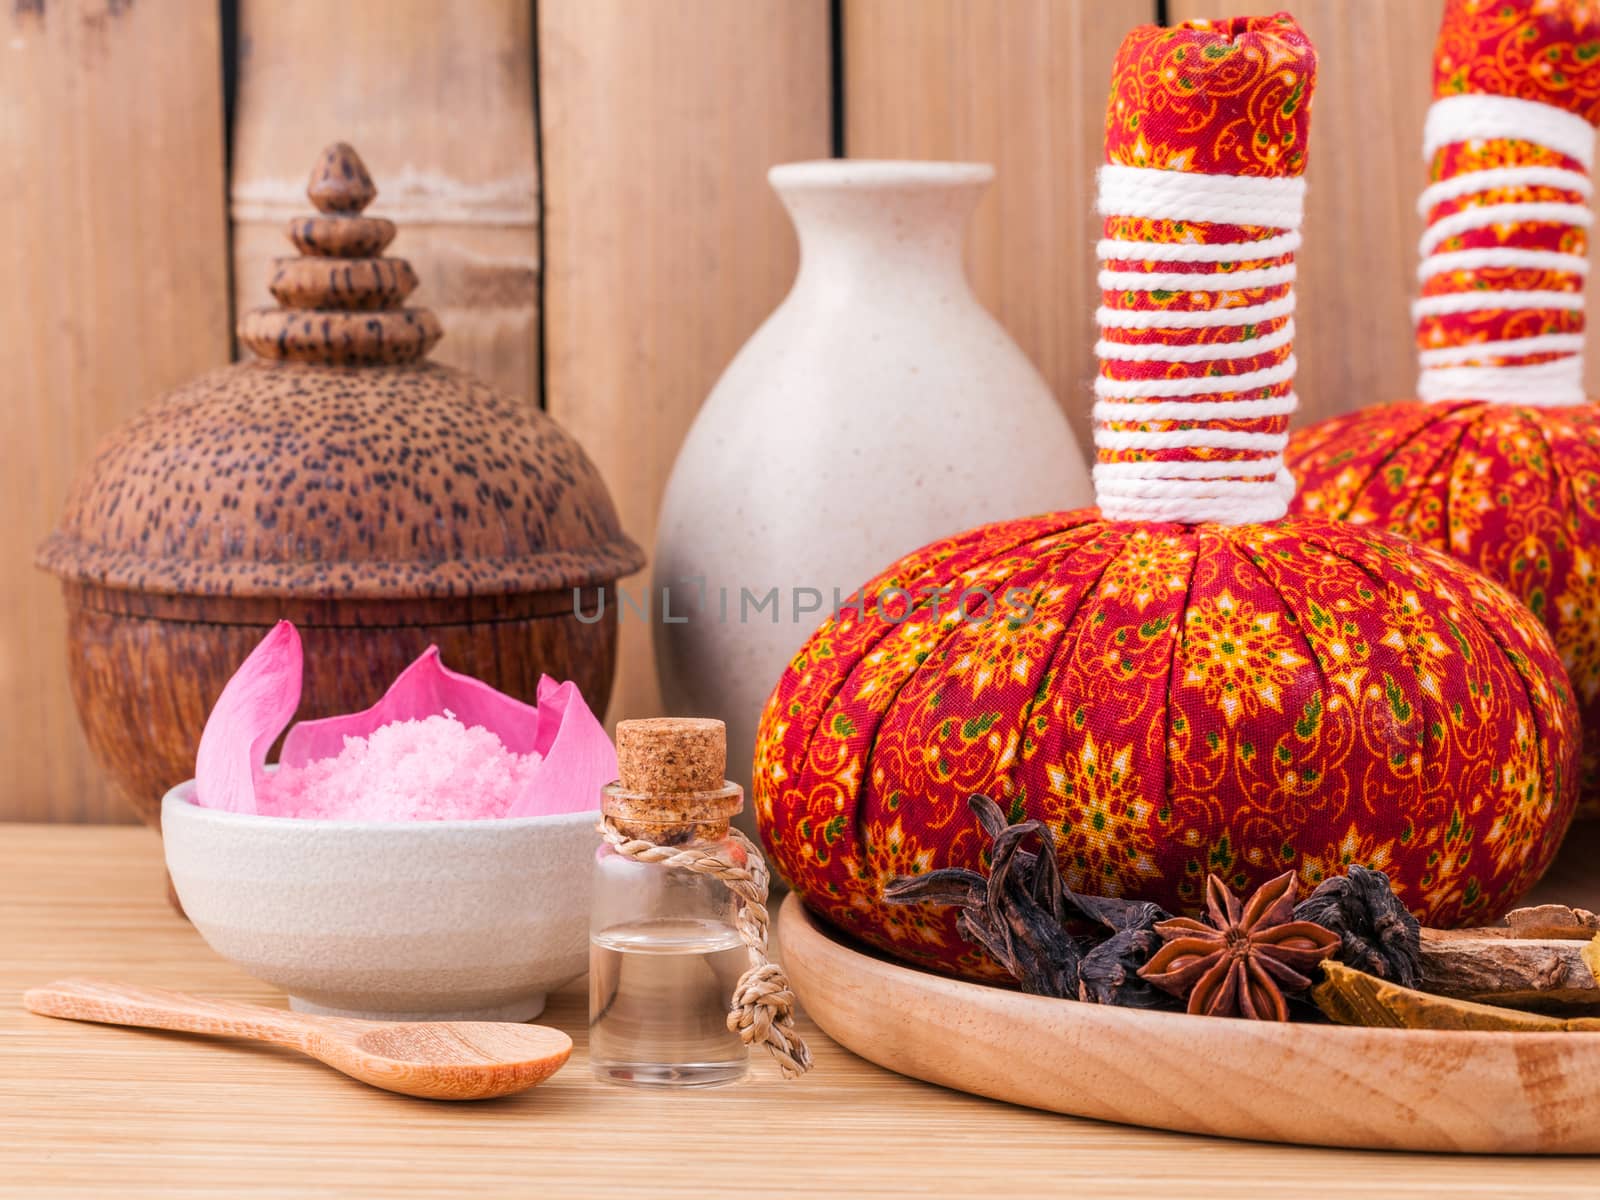 Natural Spa Ingredients herbal compress ball and essential Oil for alternative medicine and relaxation Thai Spa theme with bamboo background. by kerdkanno